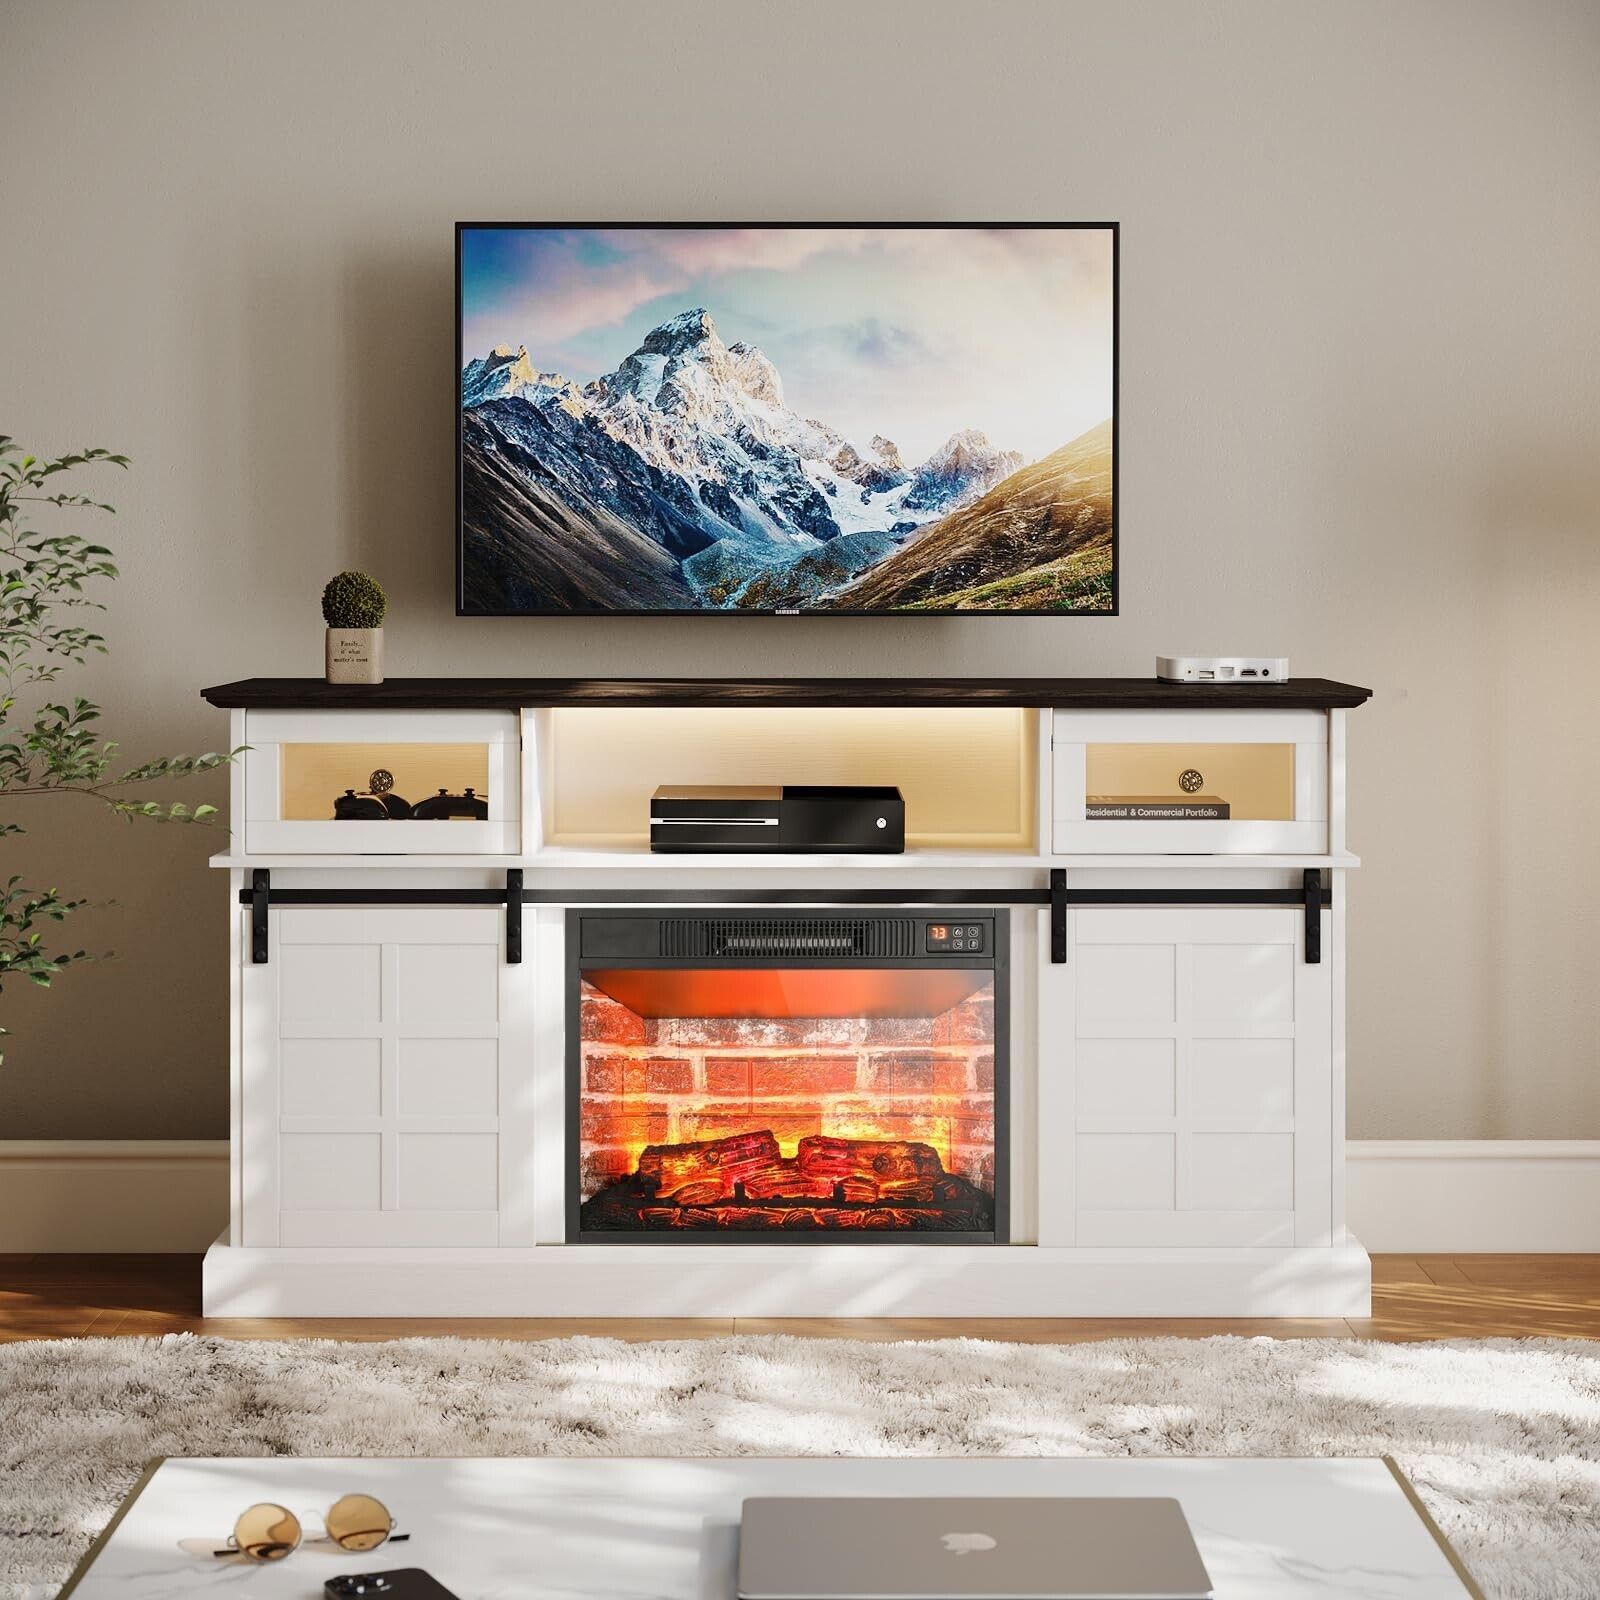 Fireplace Tv Stand W/ Led Lights & 23" Electric Fireplace For Tvs Up To 65"  | Ebay In Electric Fireplace Tv Stands (View 11 of 15)